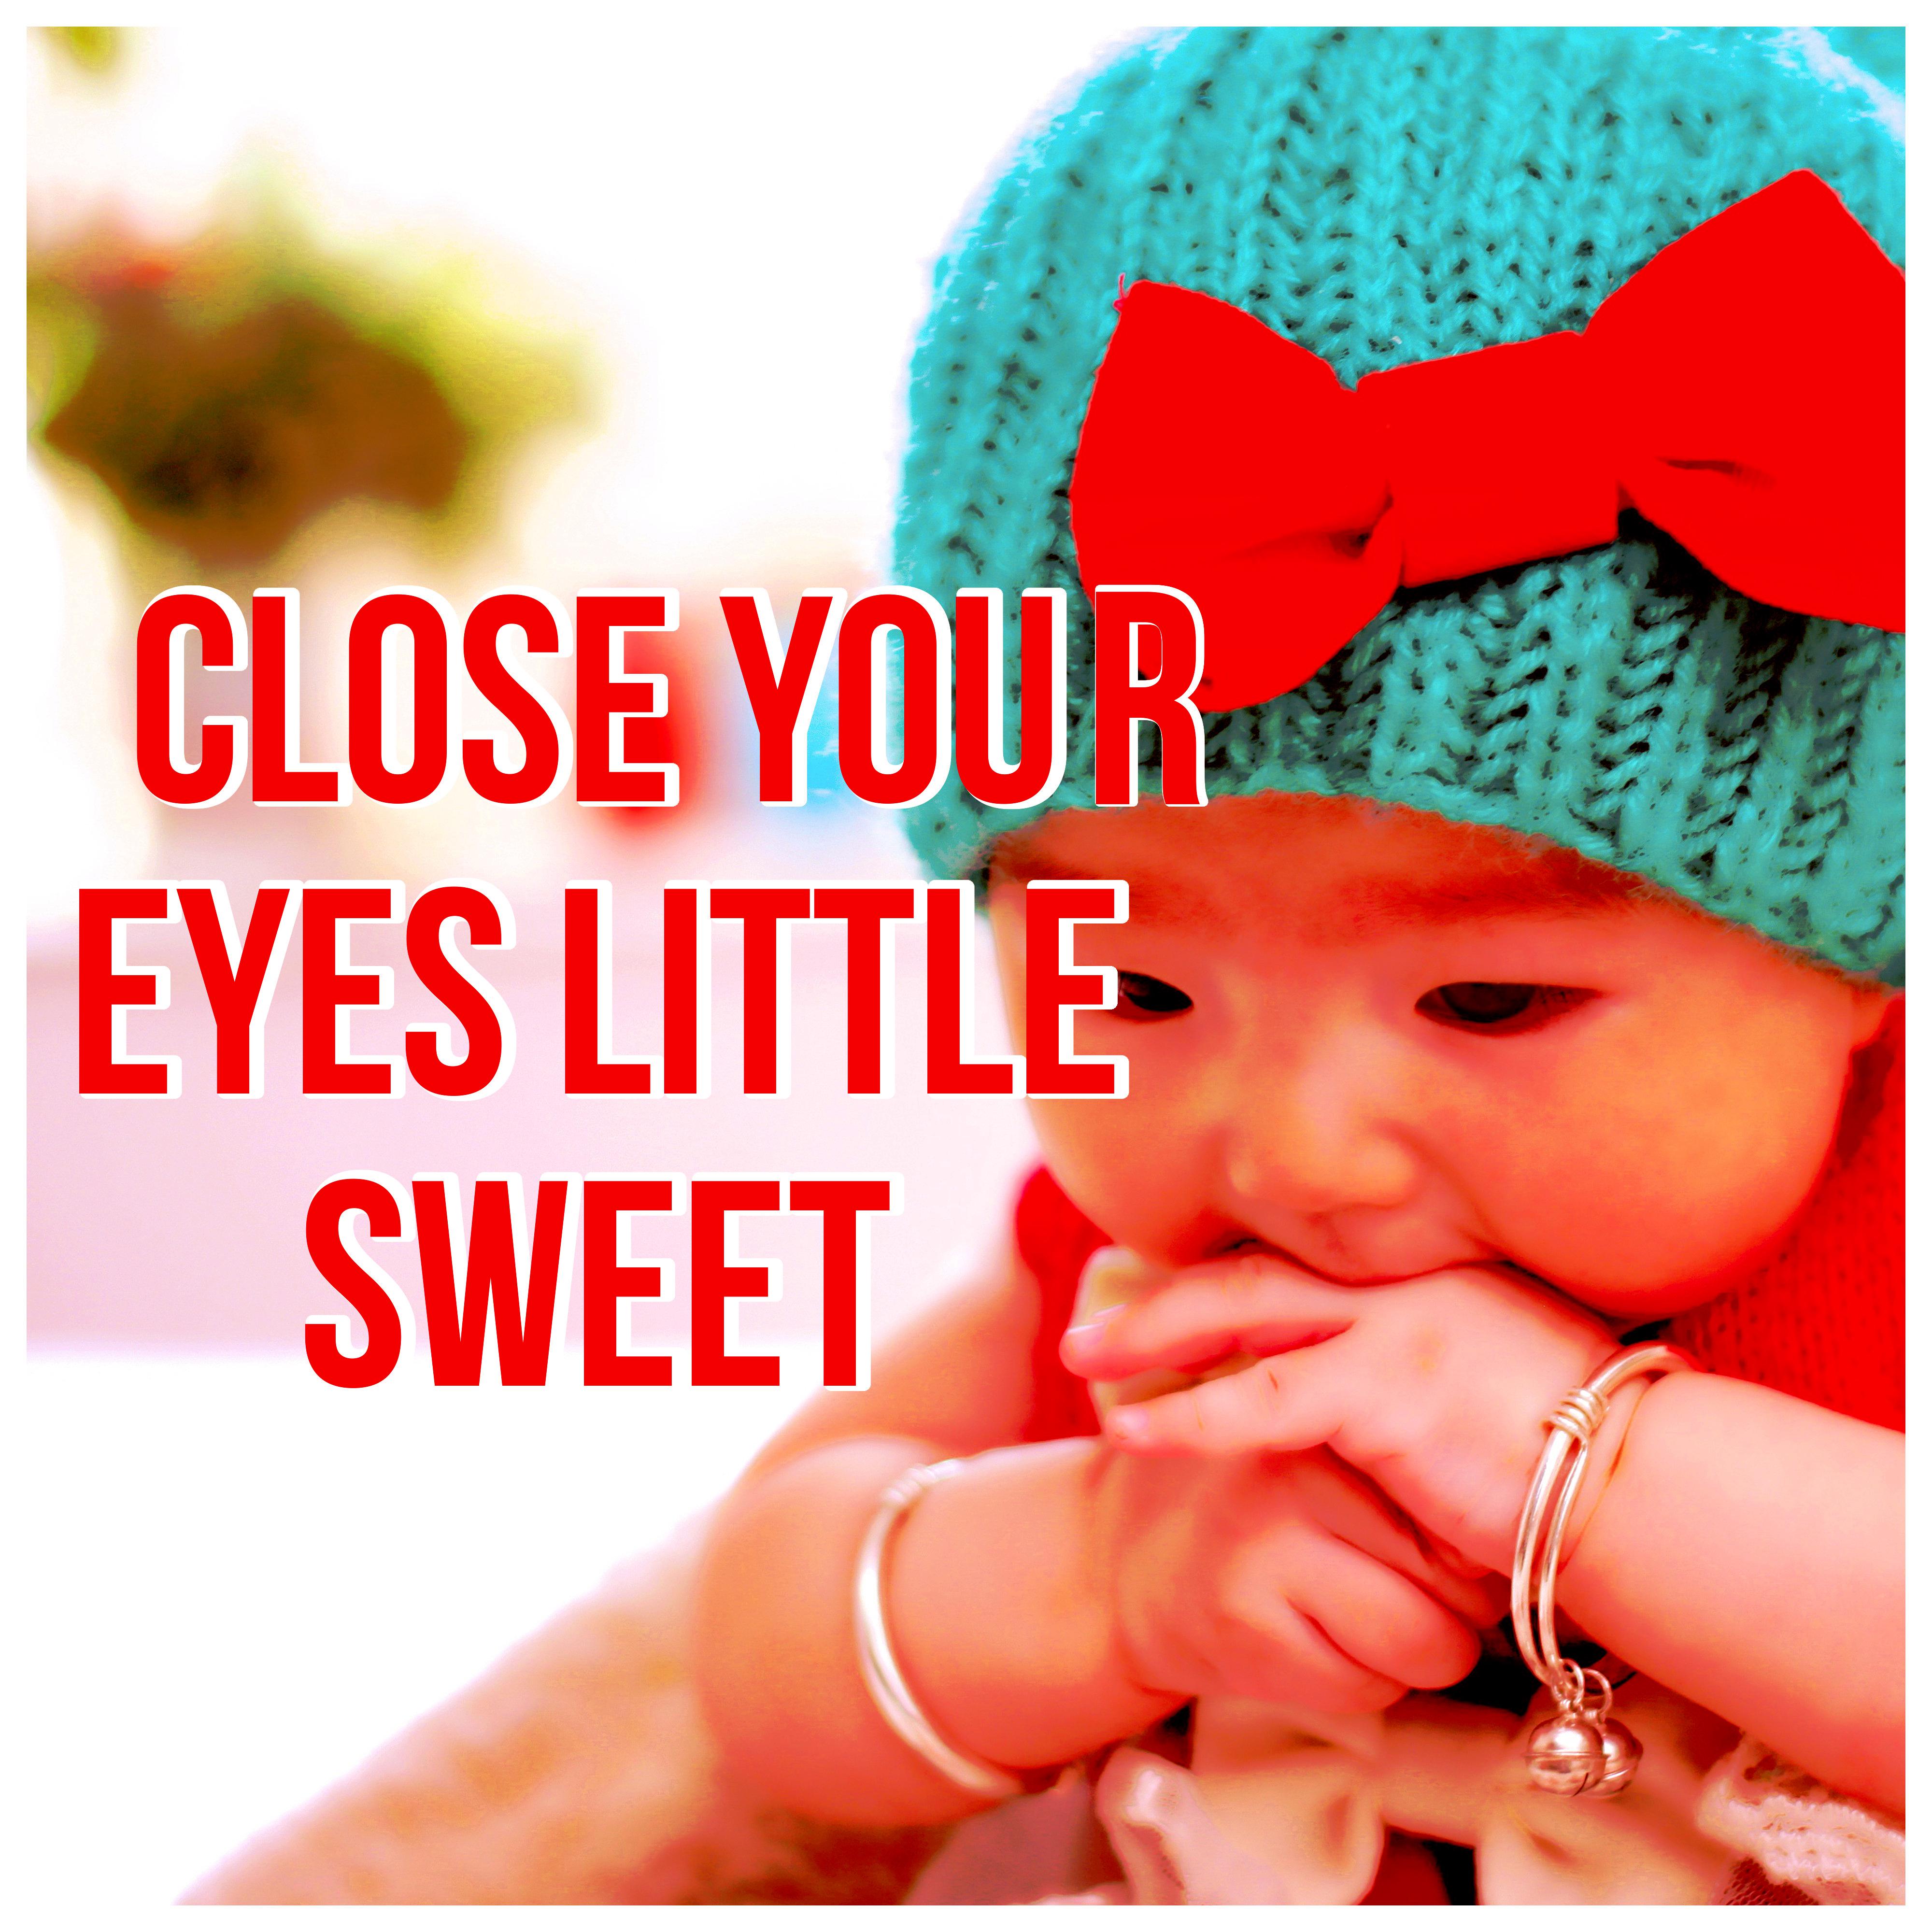 Close Your Eyes Little Sweet – Calm Music for Newborn to Relax Before Sleep, New Age Gentle Sounds to Baby Massage, White Noises and Nature Sounds for Peace Sleep